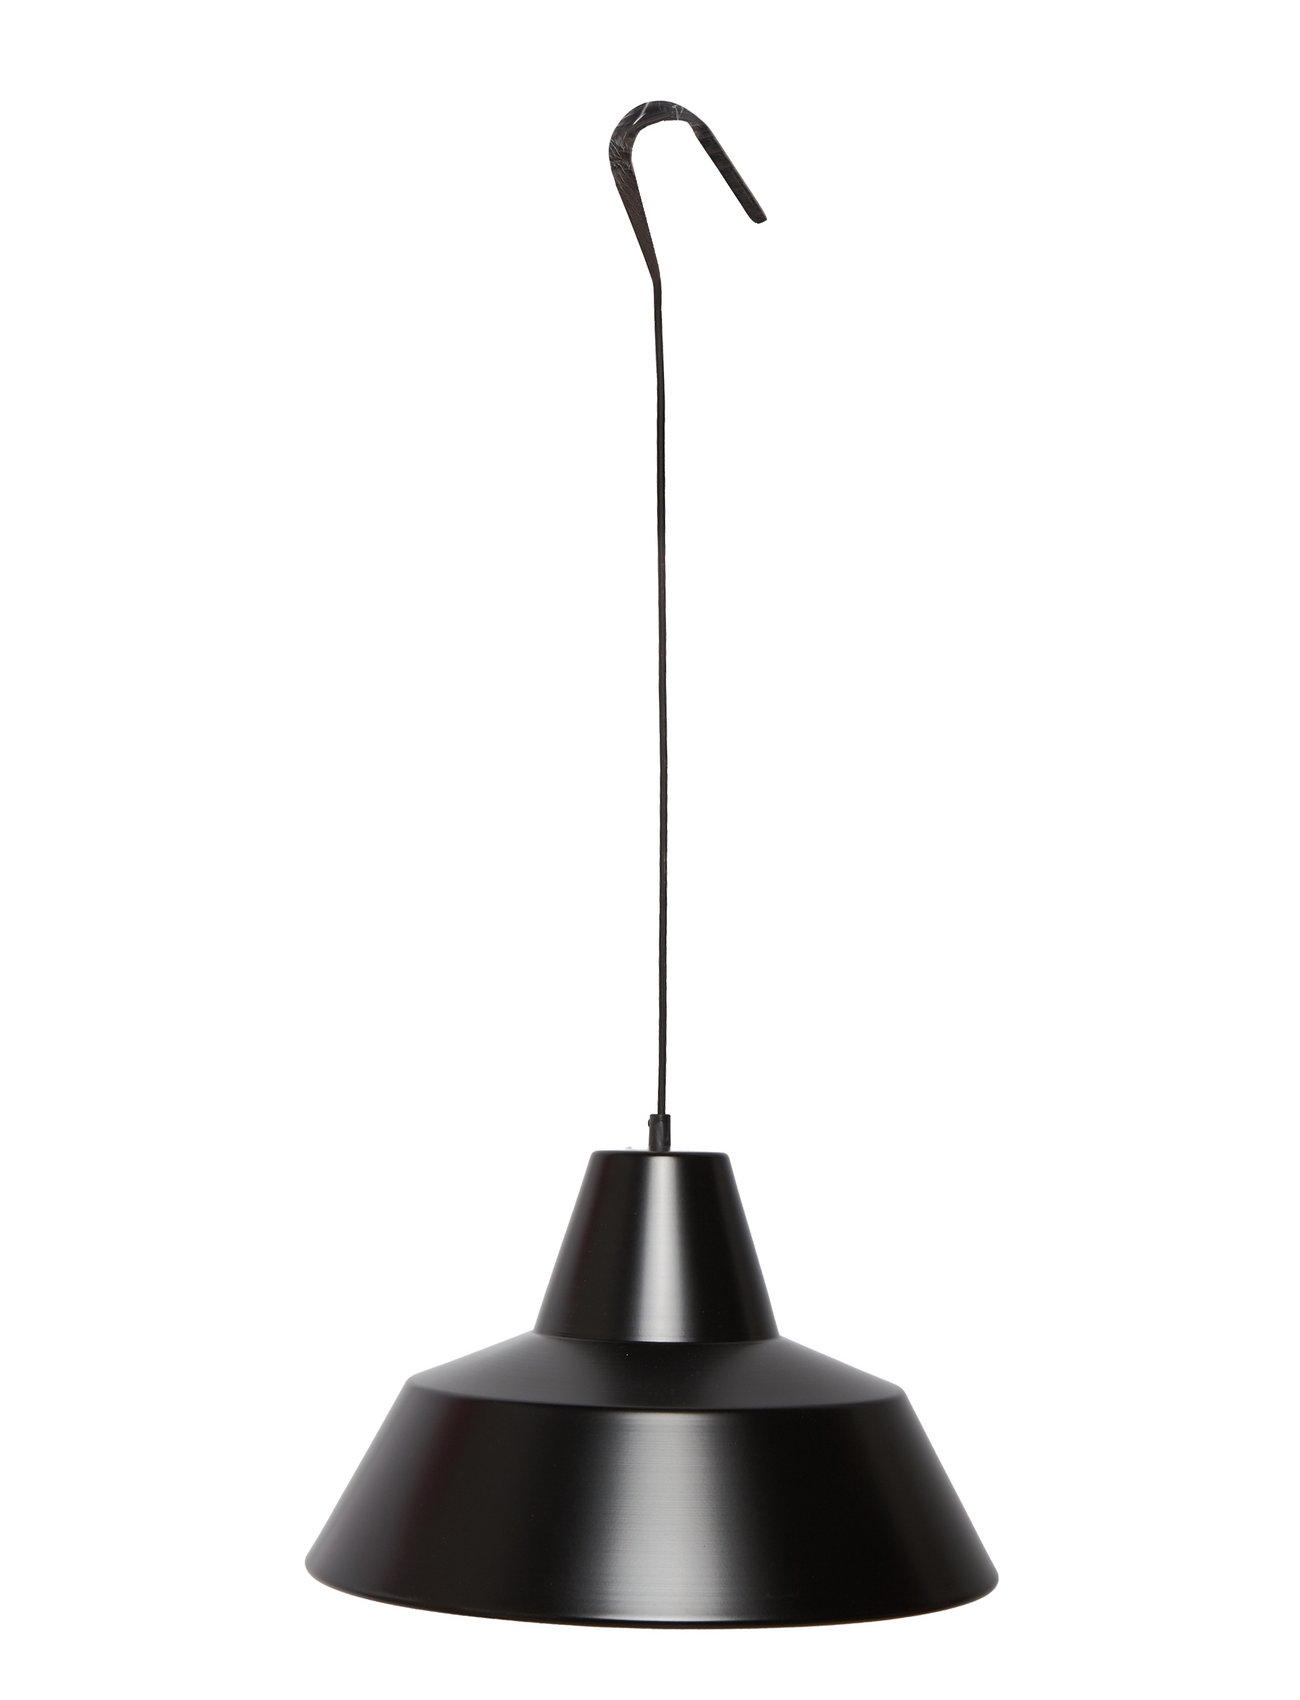 Workshop Lamp W4 Home Lighting Lamps Ceiling Lamps Pendant Lamps Black Made By Hand